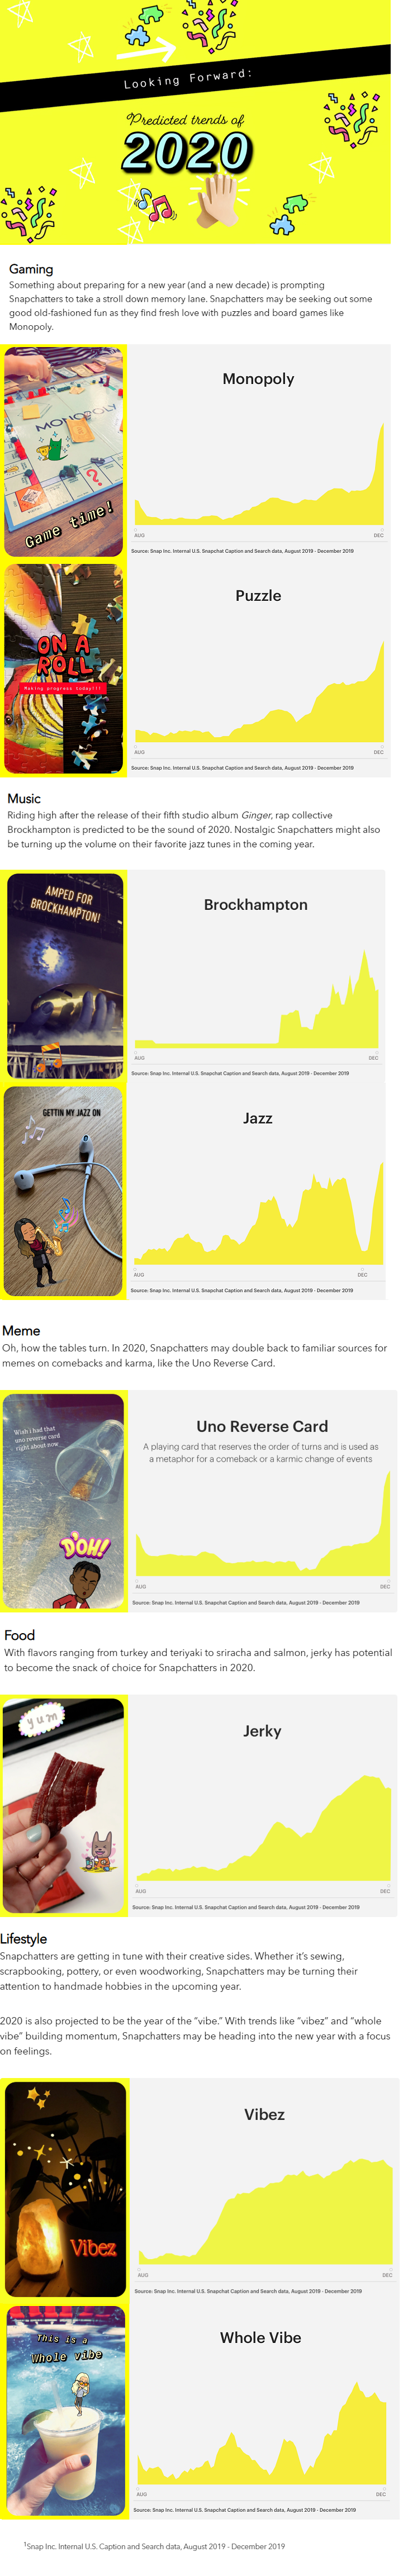 snapchat outlines rising trends for 2020 in new report infographic